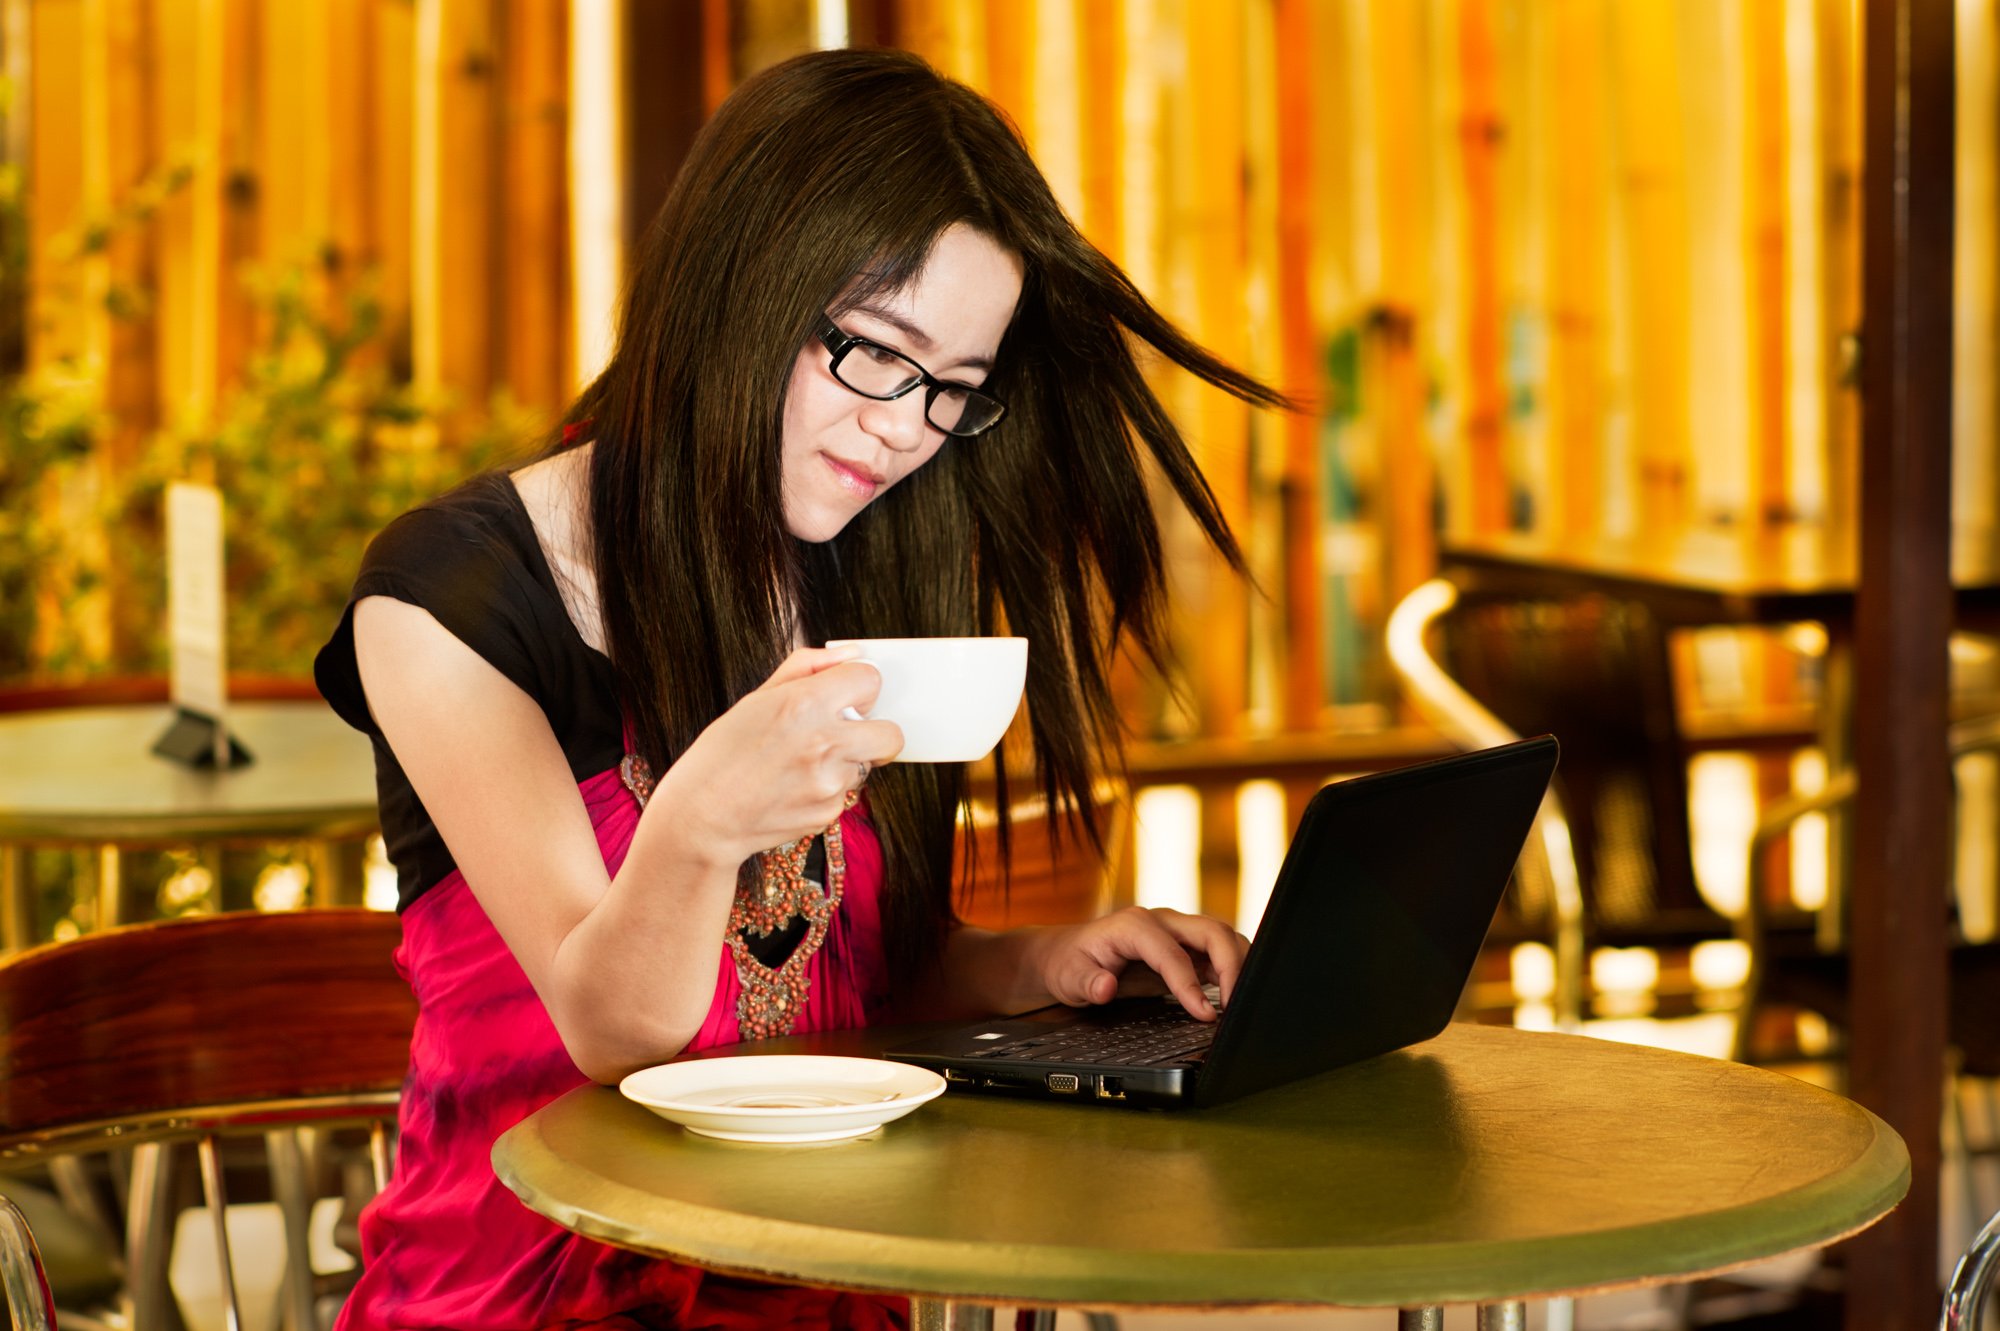 Young Asian woman with a laptop computer drinking coffee at an out door cafe for how to make photo stories